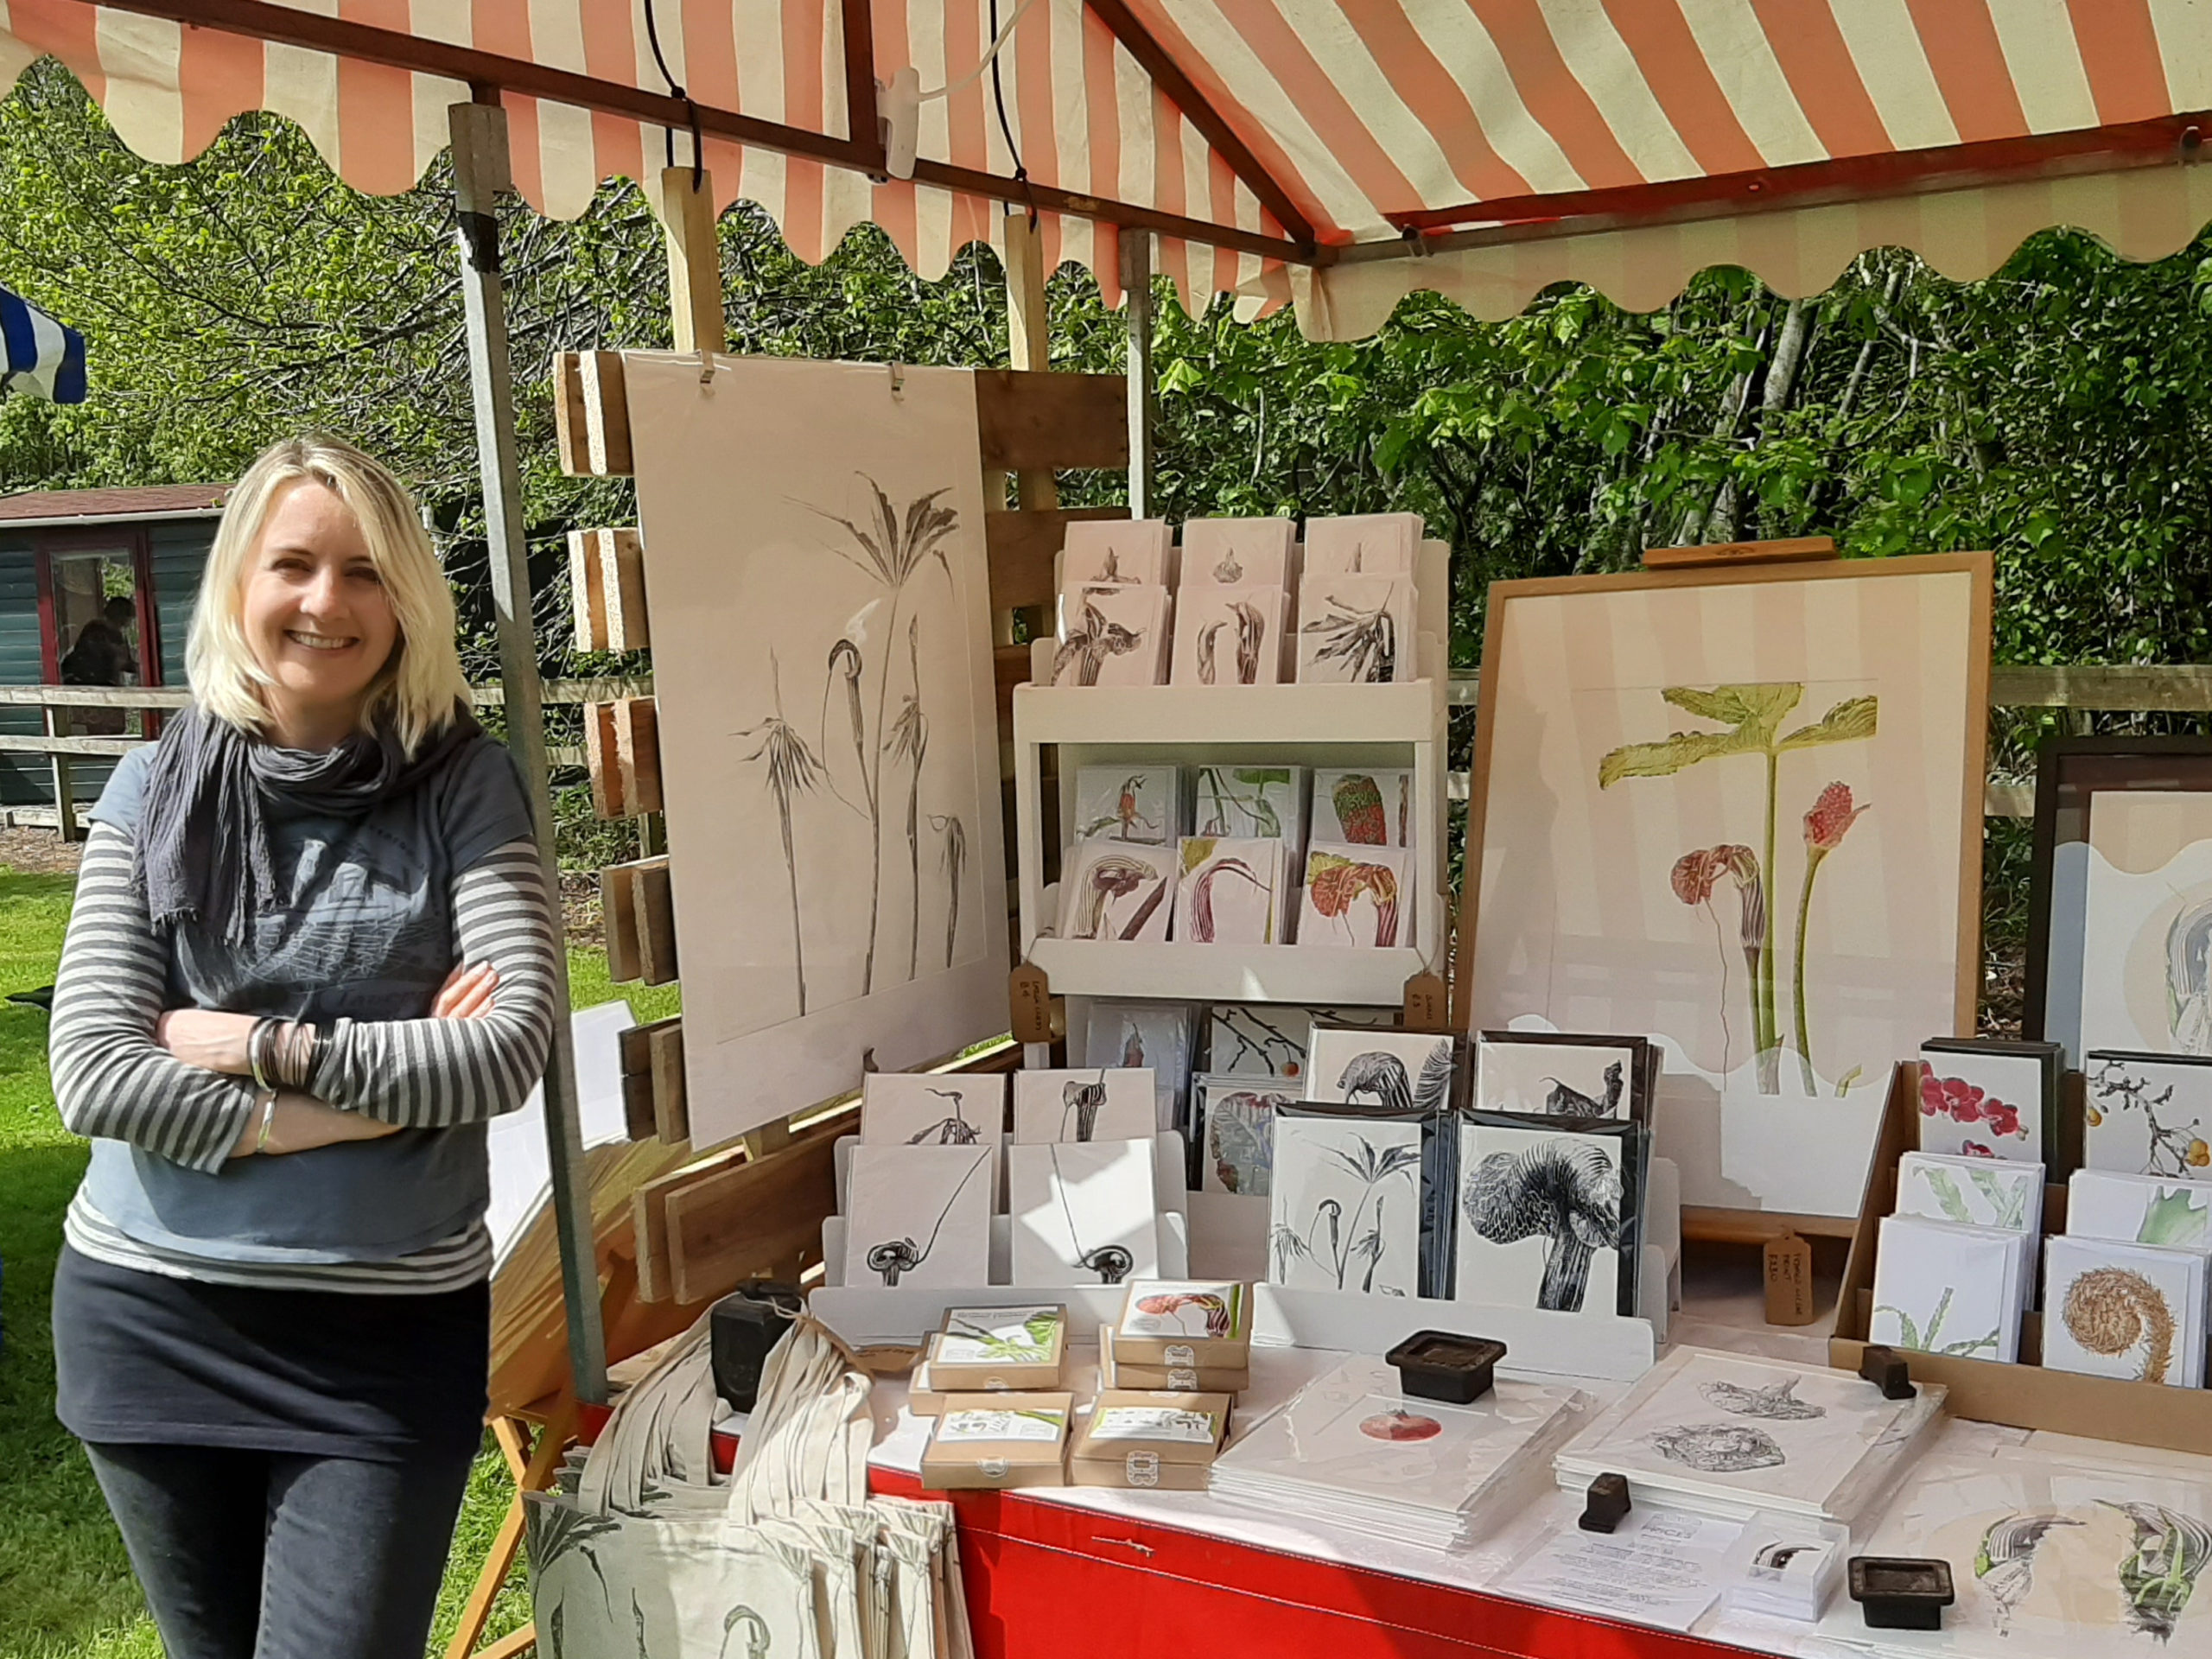 Marianne Hazlewood at her Marchmont Open Studios Makers Stall in May 2022, Photo by Valerie Jones